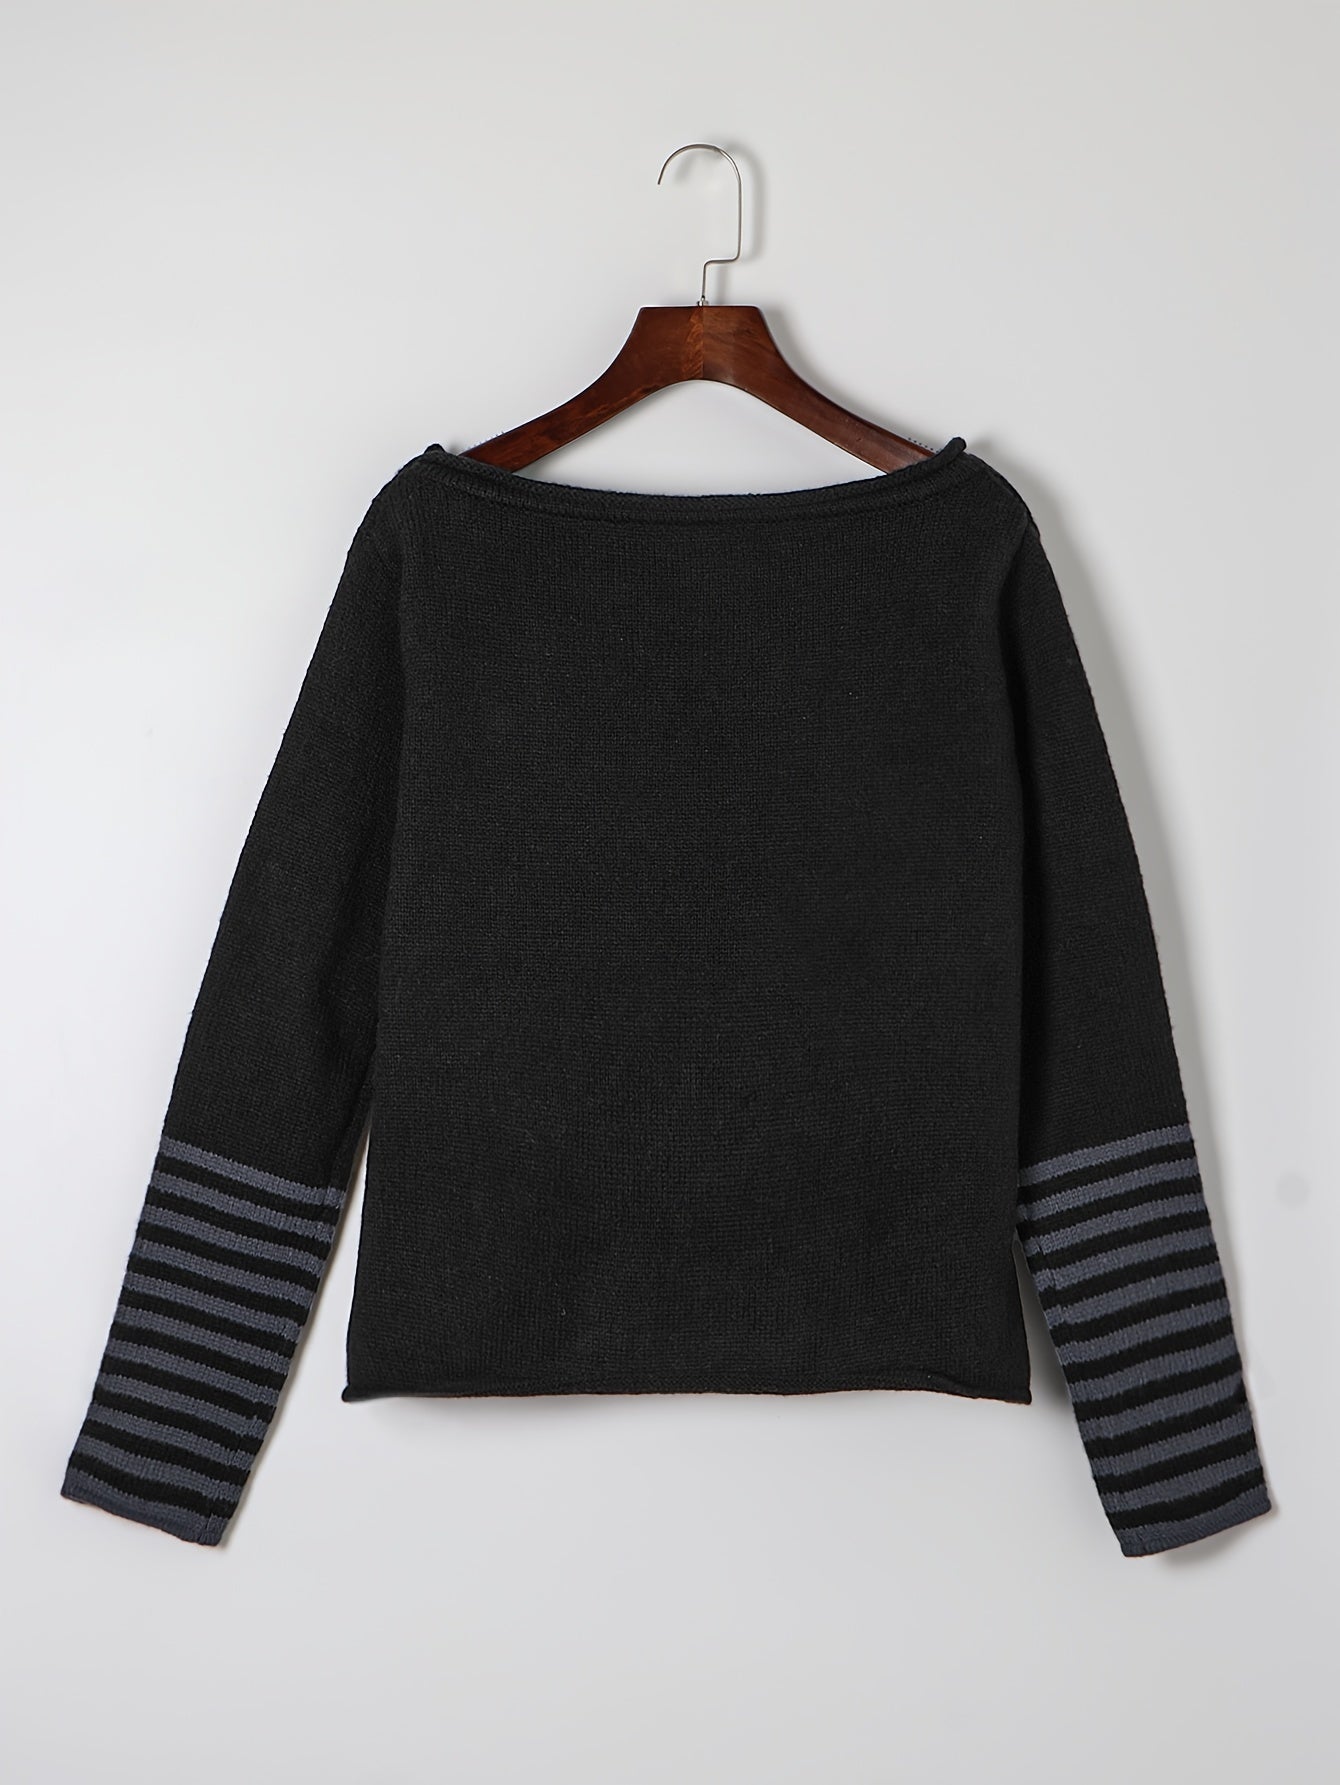 xieyinshe  Striped Boat Neck Pullover Sweater, Casual Long Sleeve Comfy Sweater, Women's Clothing